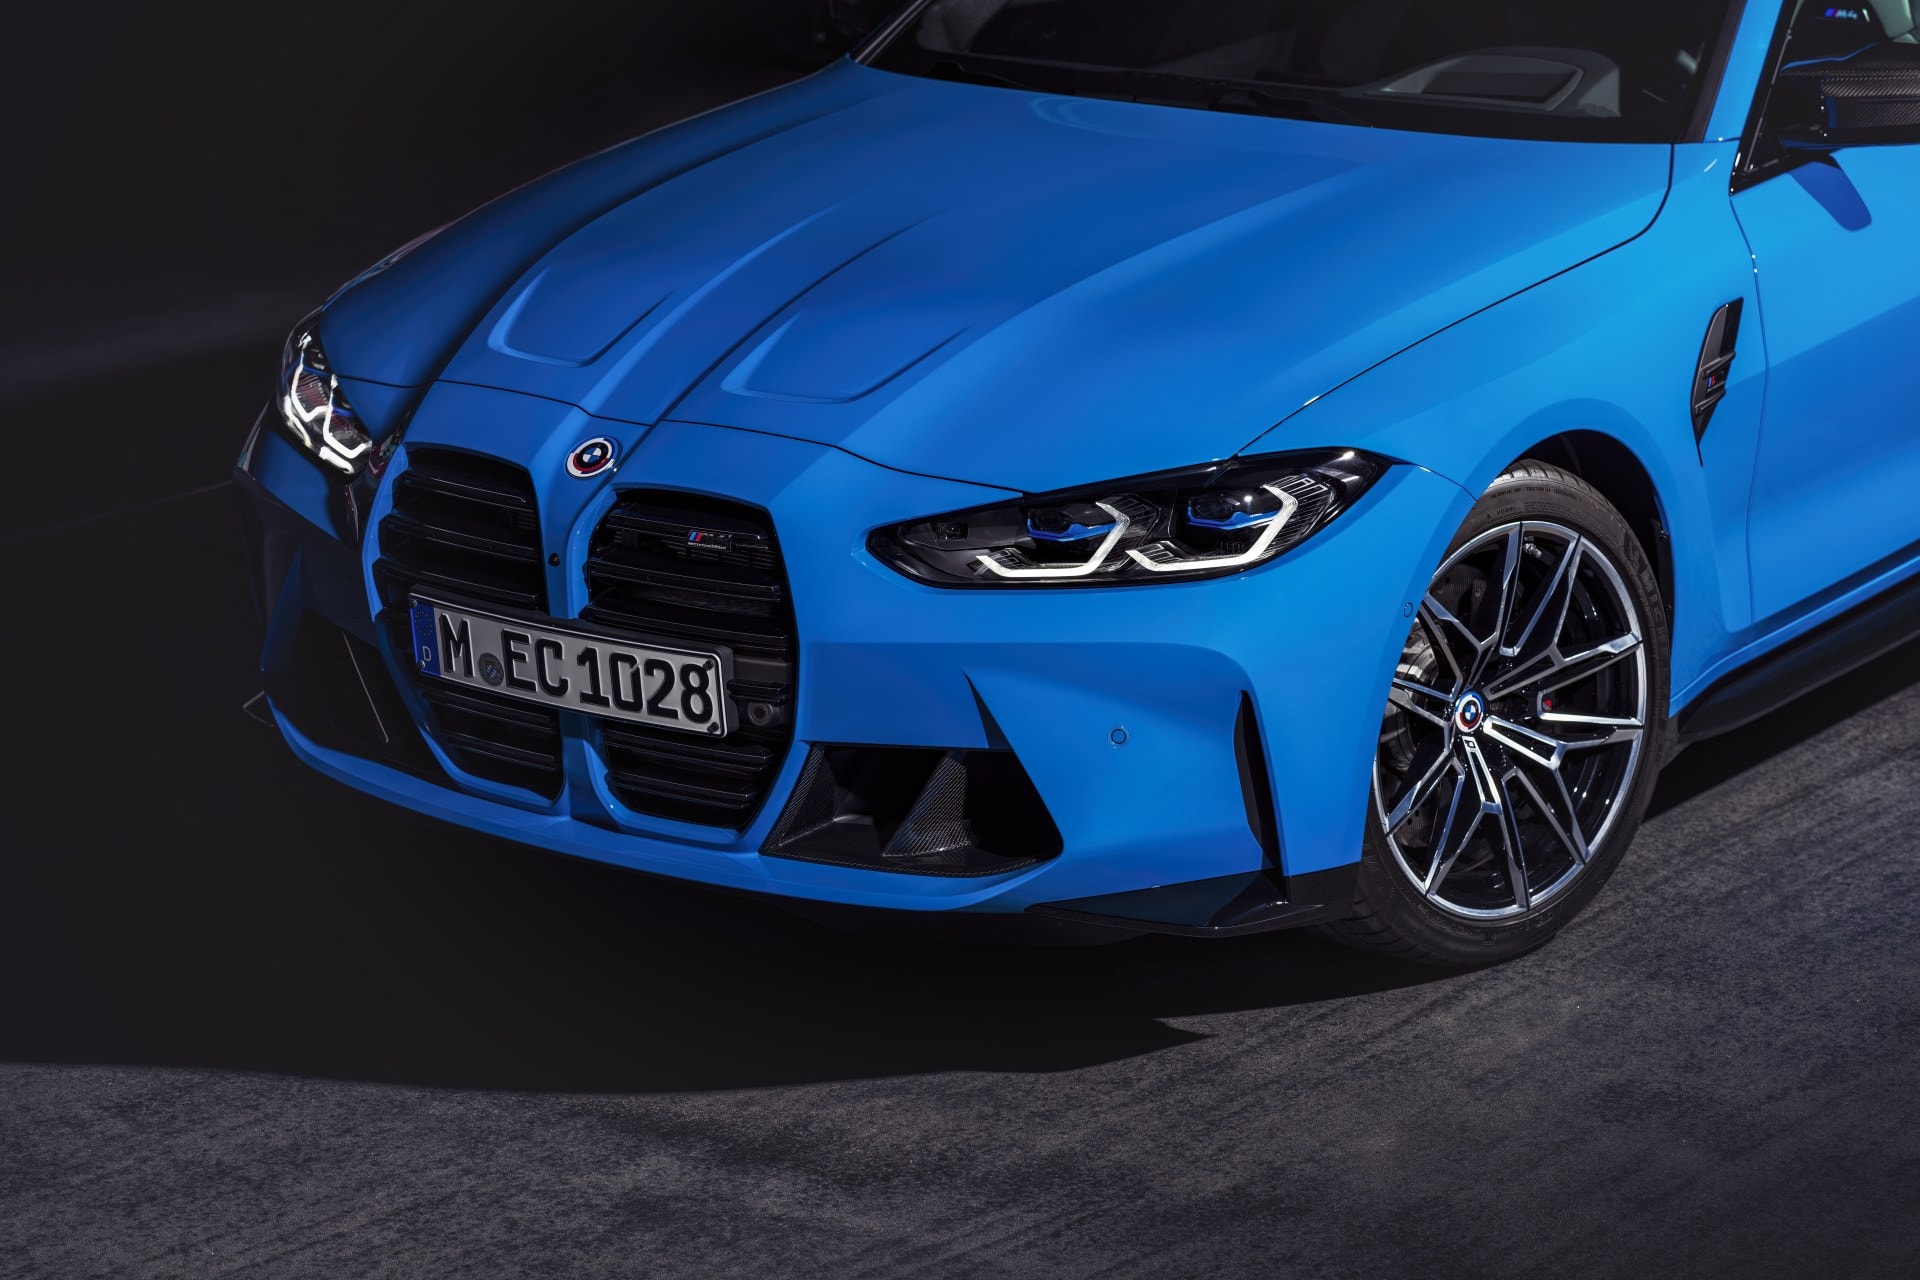 Bmw Celebrates The Th Anniversary Of M With A Limited Edition Model